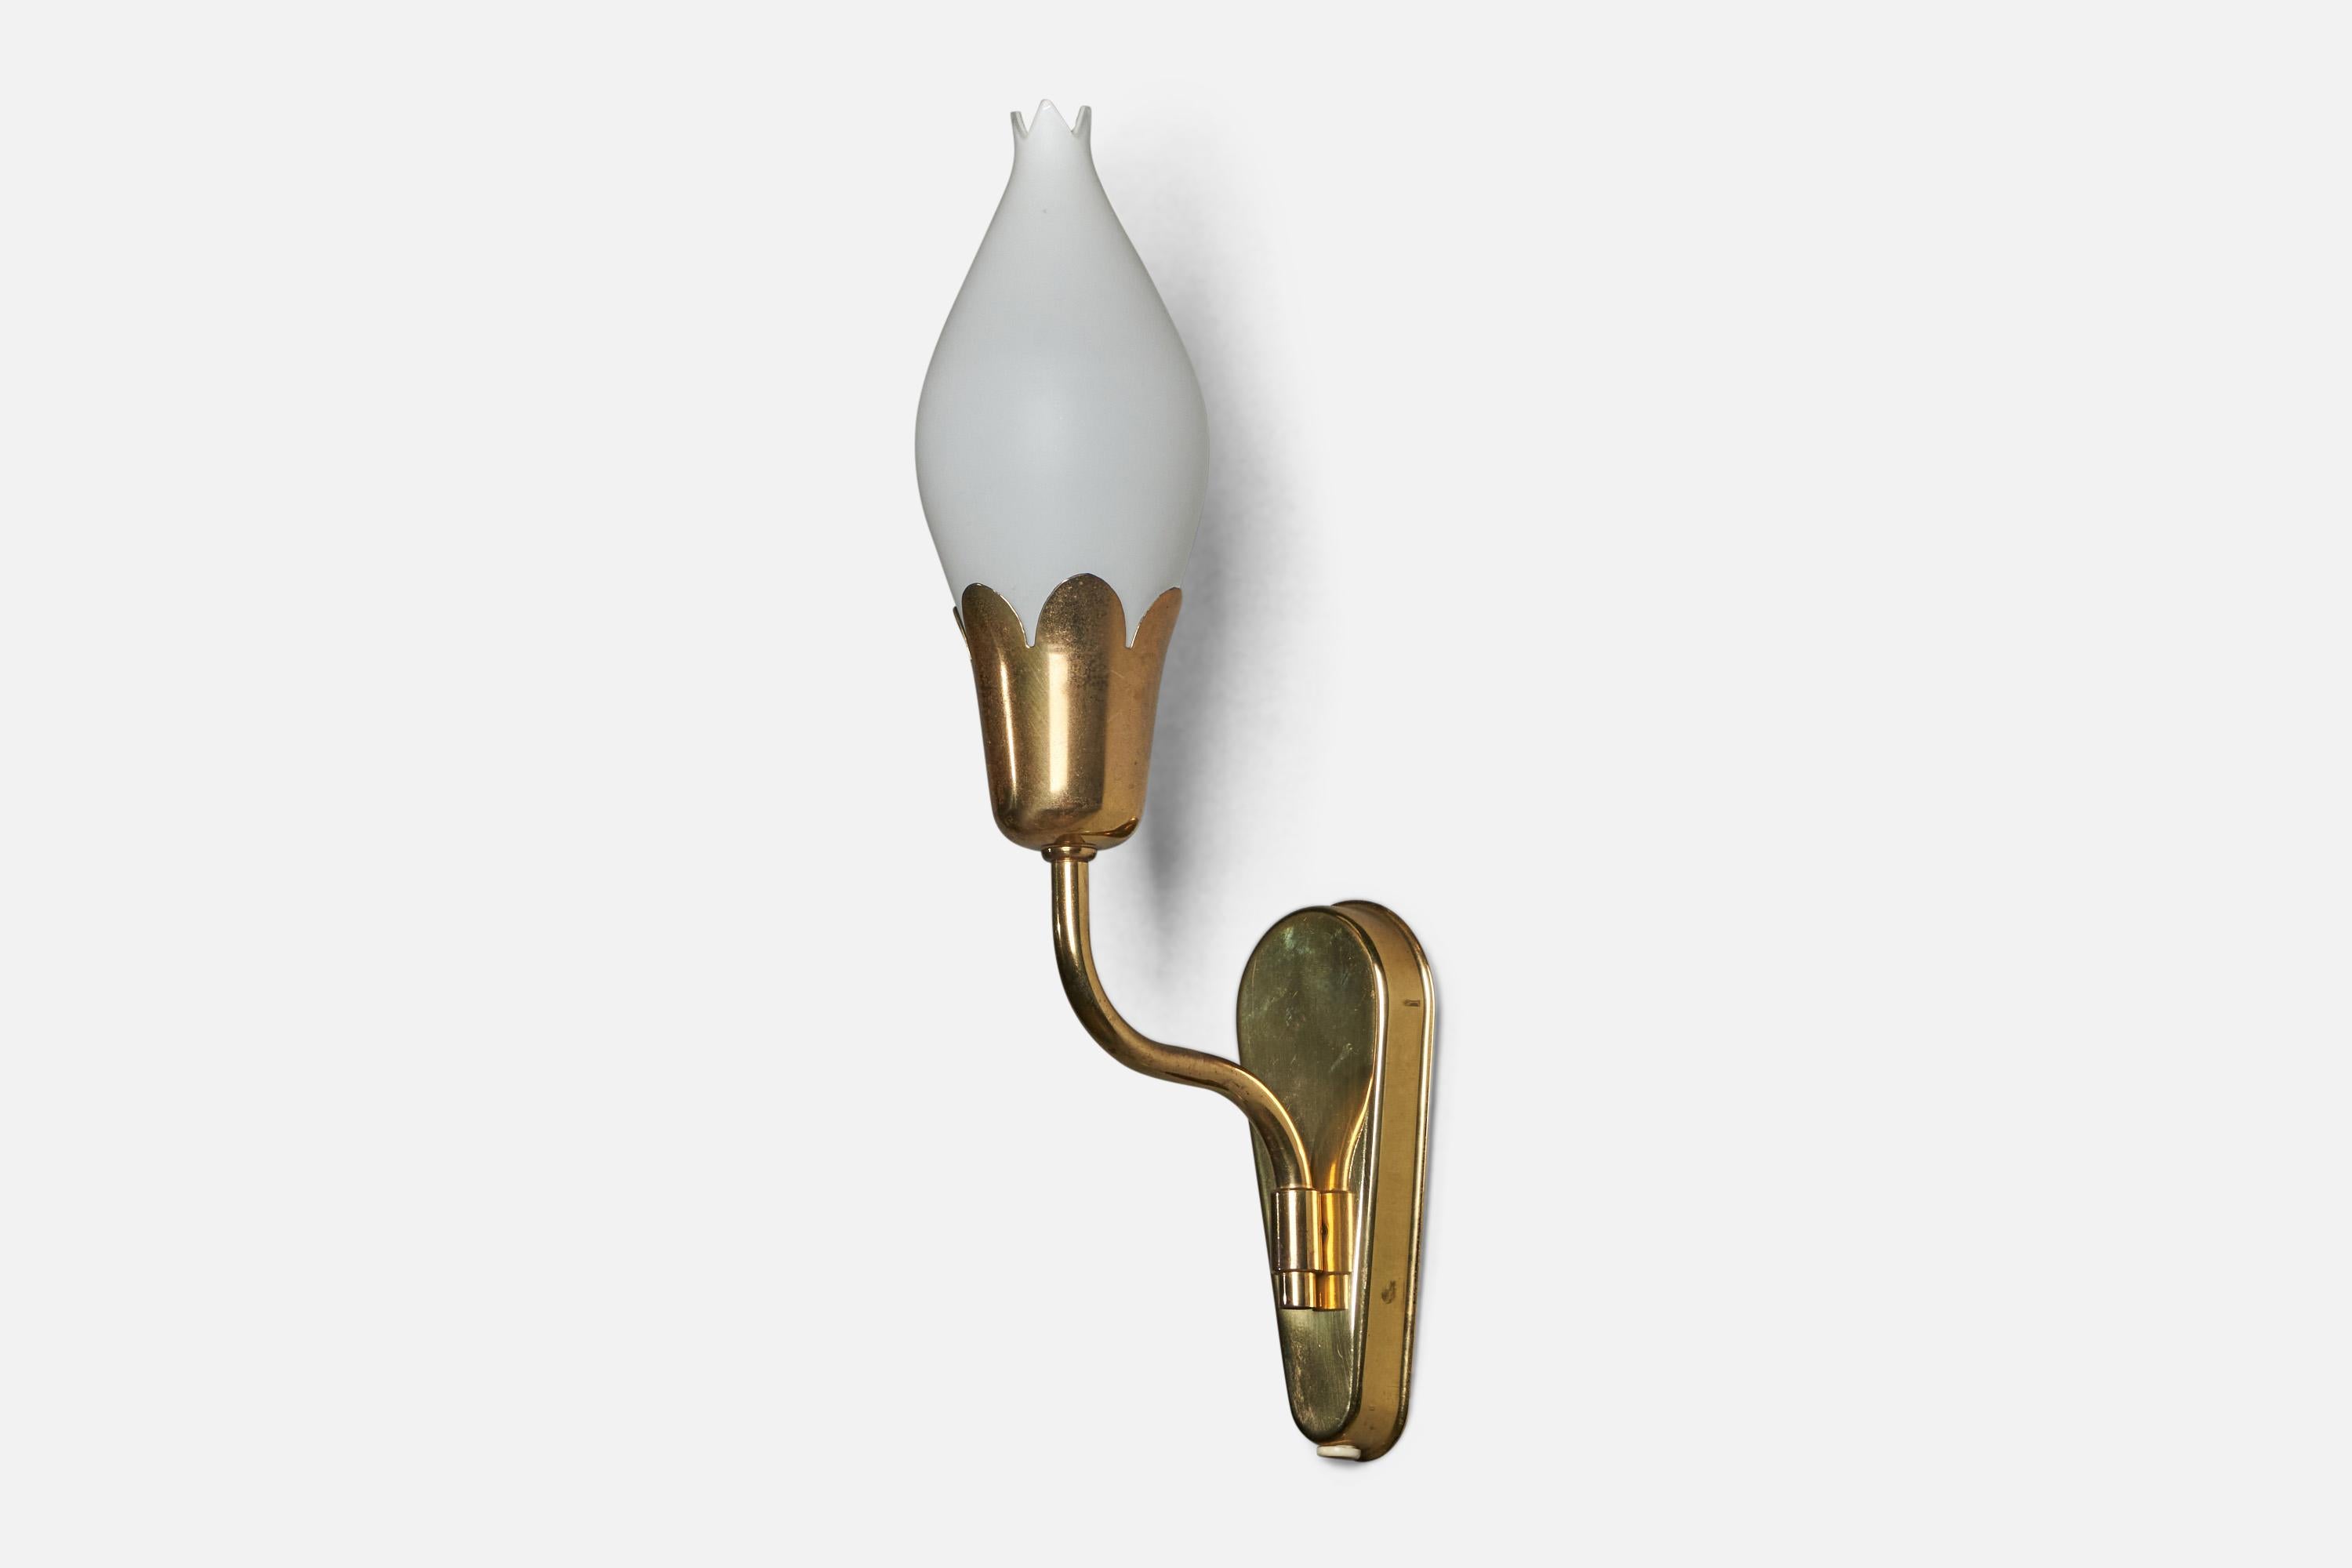 A brass and opaline glass wall light designed and produced by 
Fog & Mørup, Denmark, c. 1950s.

Overall Dimensions (inches): 14.5” H x 3” W x 5” D
Back Plate Dimensions (inches): 6” H x 2.5” W x 0.6” D 
Bulb Specifications: E-14 Bulb
Number of